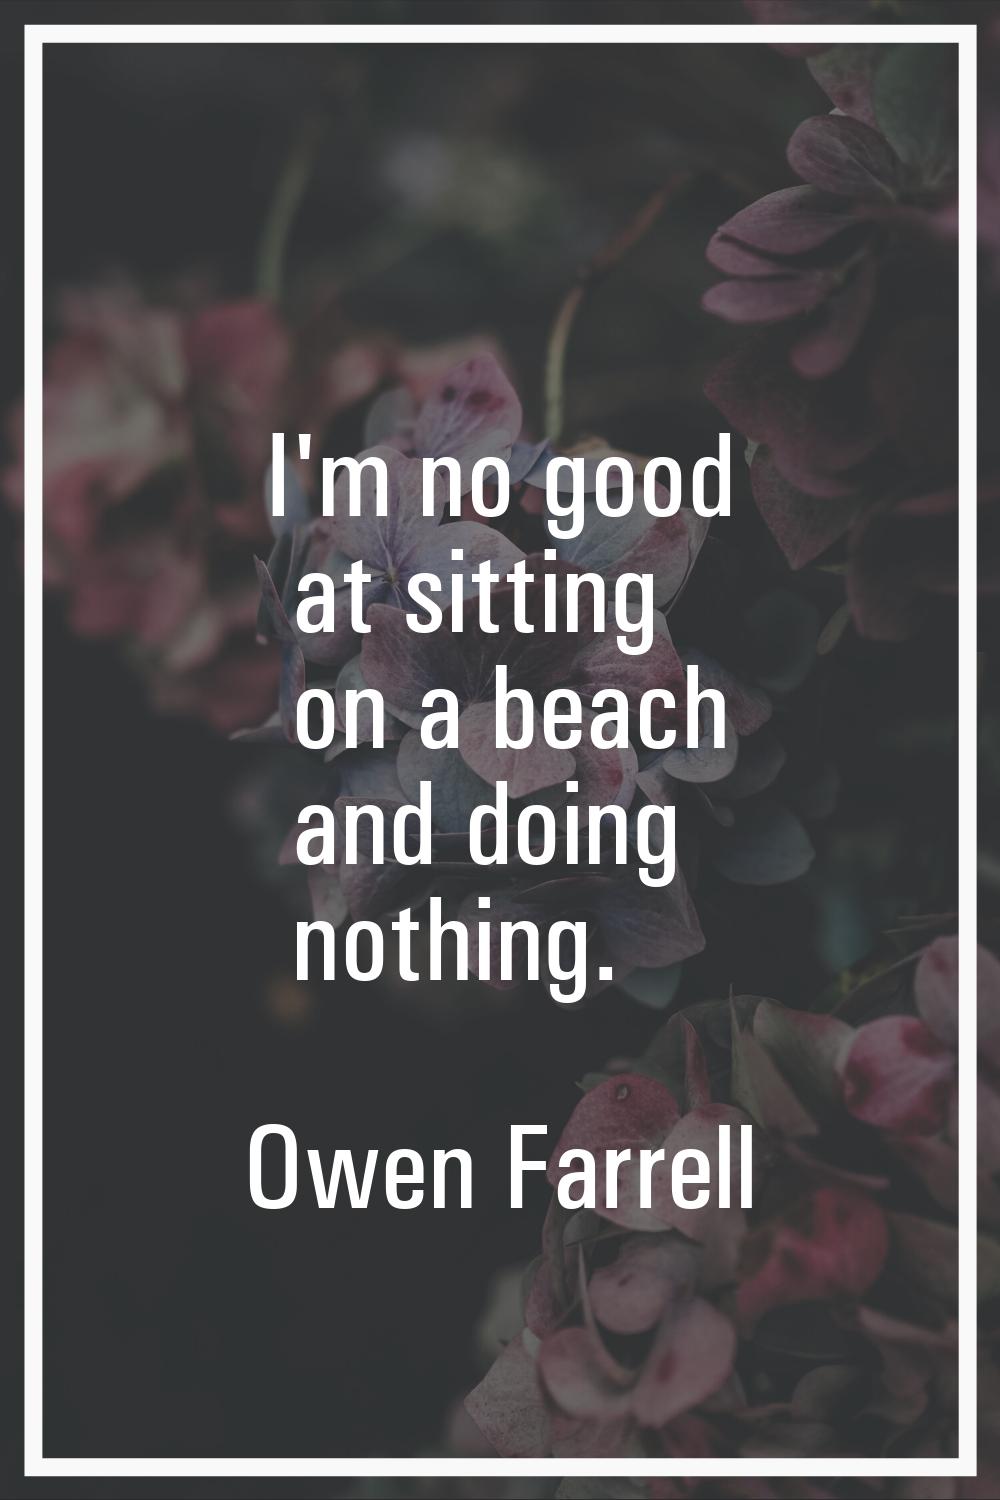 I'm no good at sitting on a beach and doing nothing.